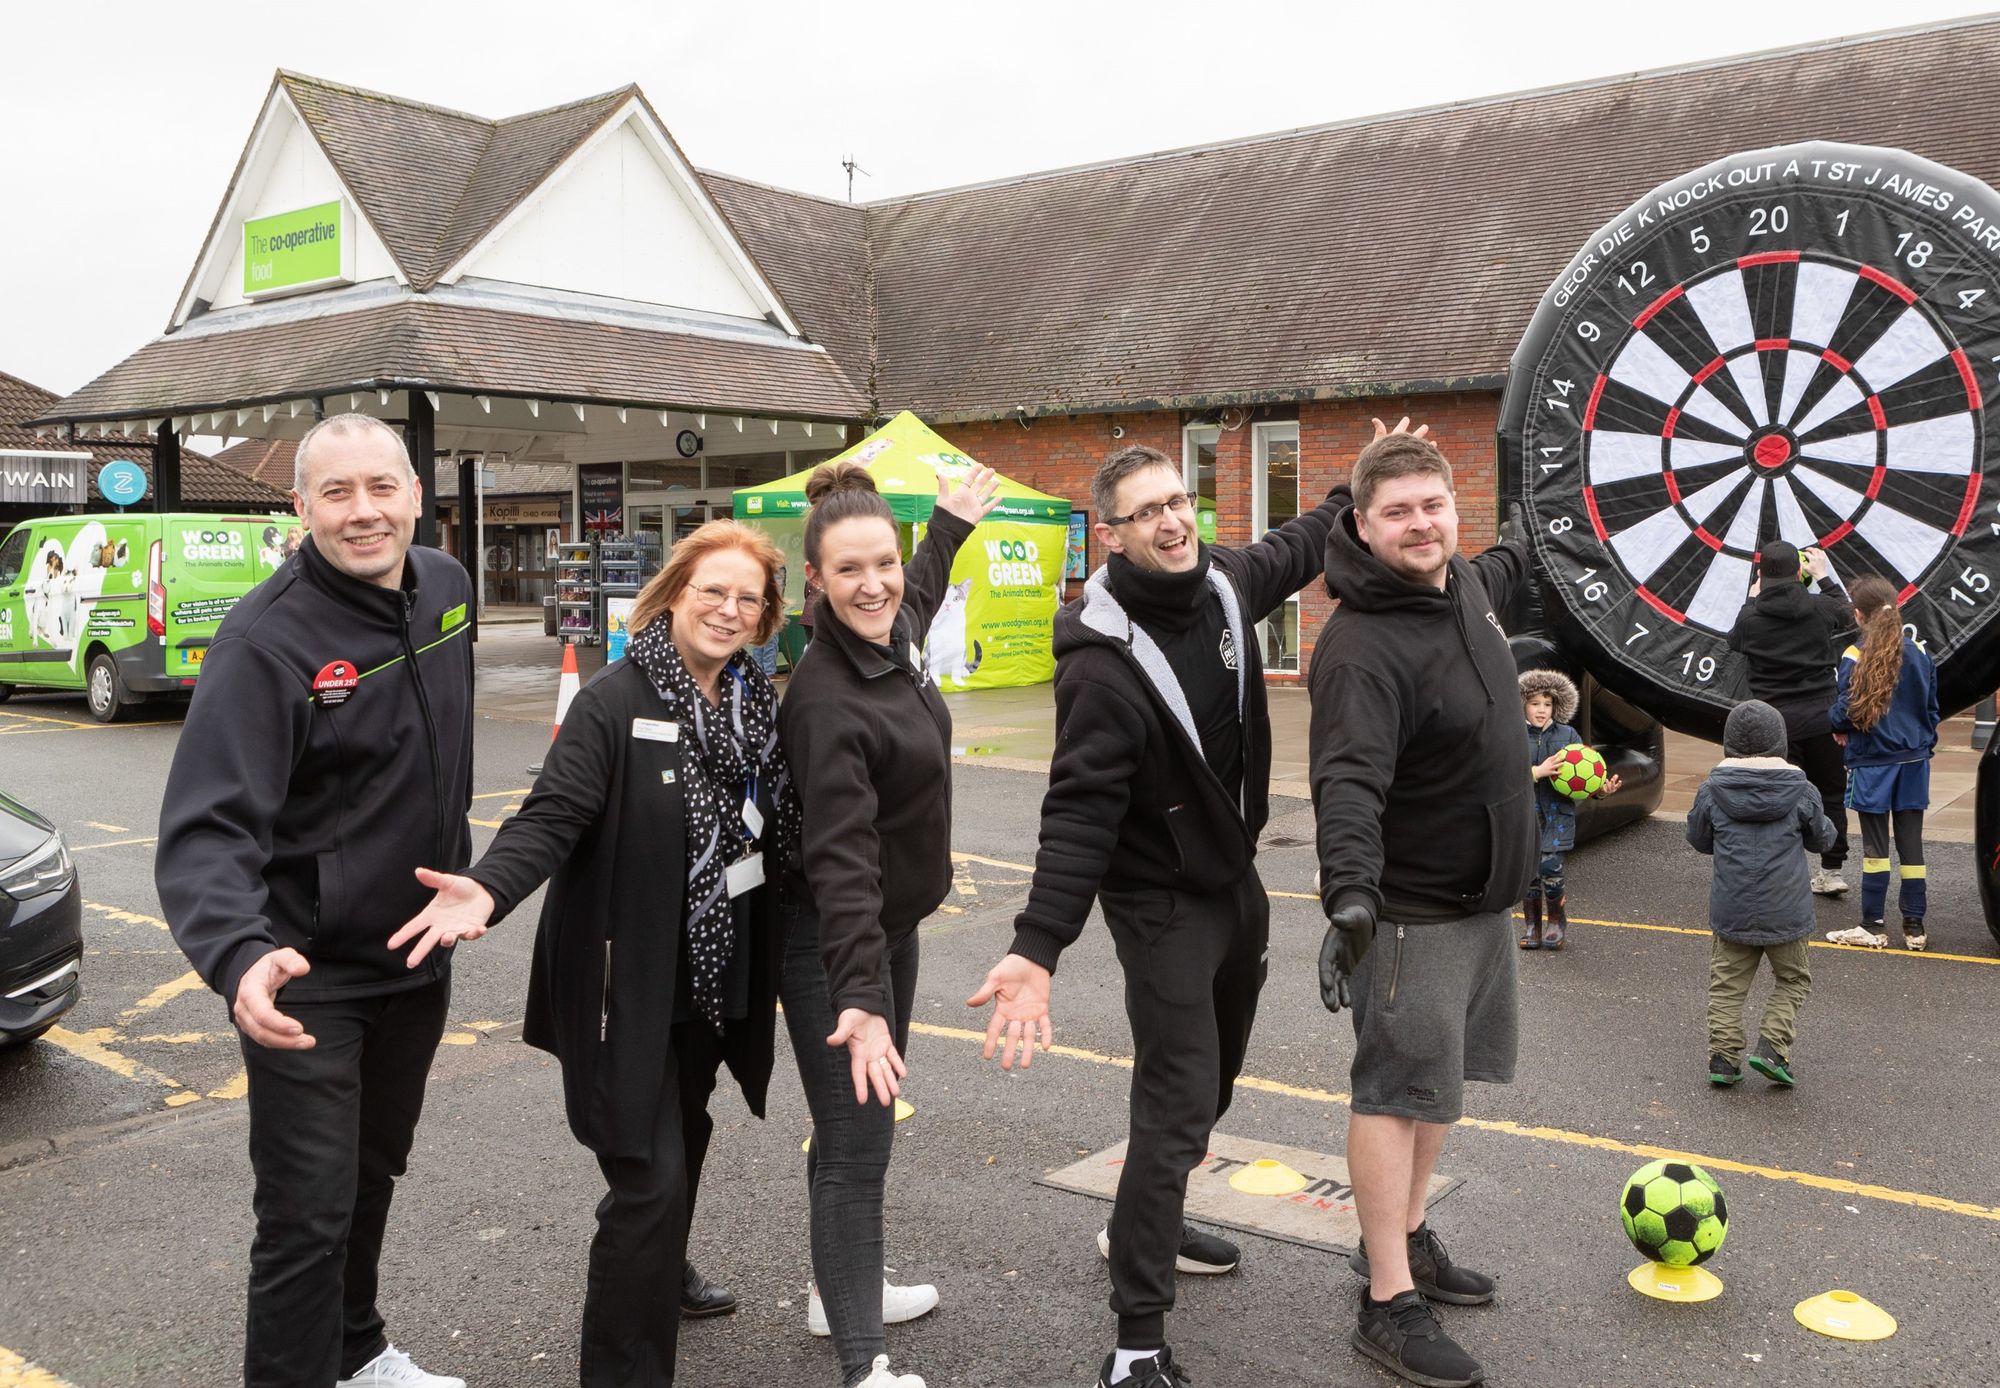 St Ives food store brings community together with day of health, fitness and family fun